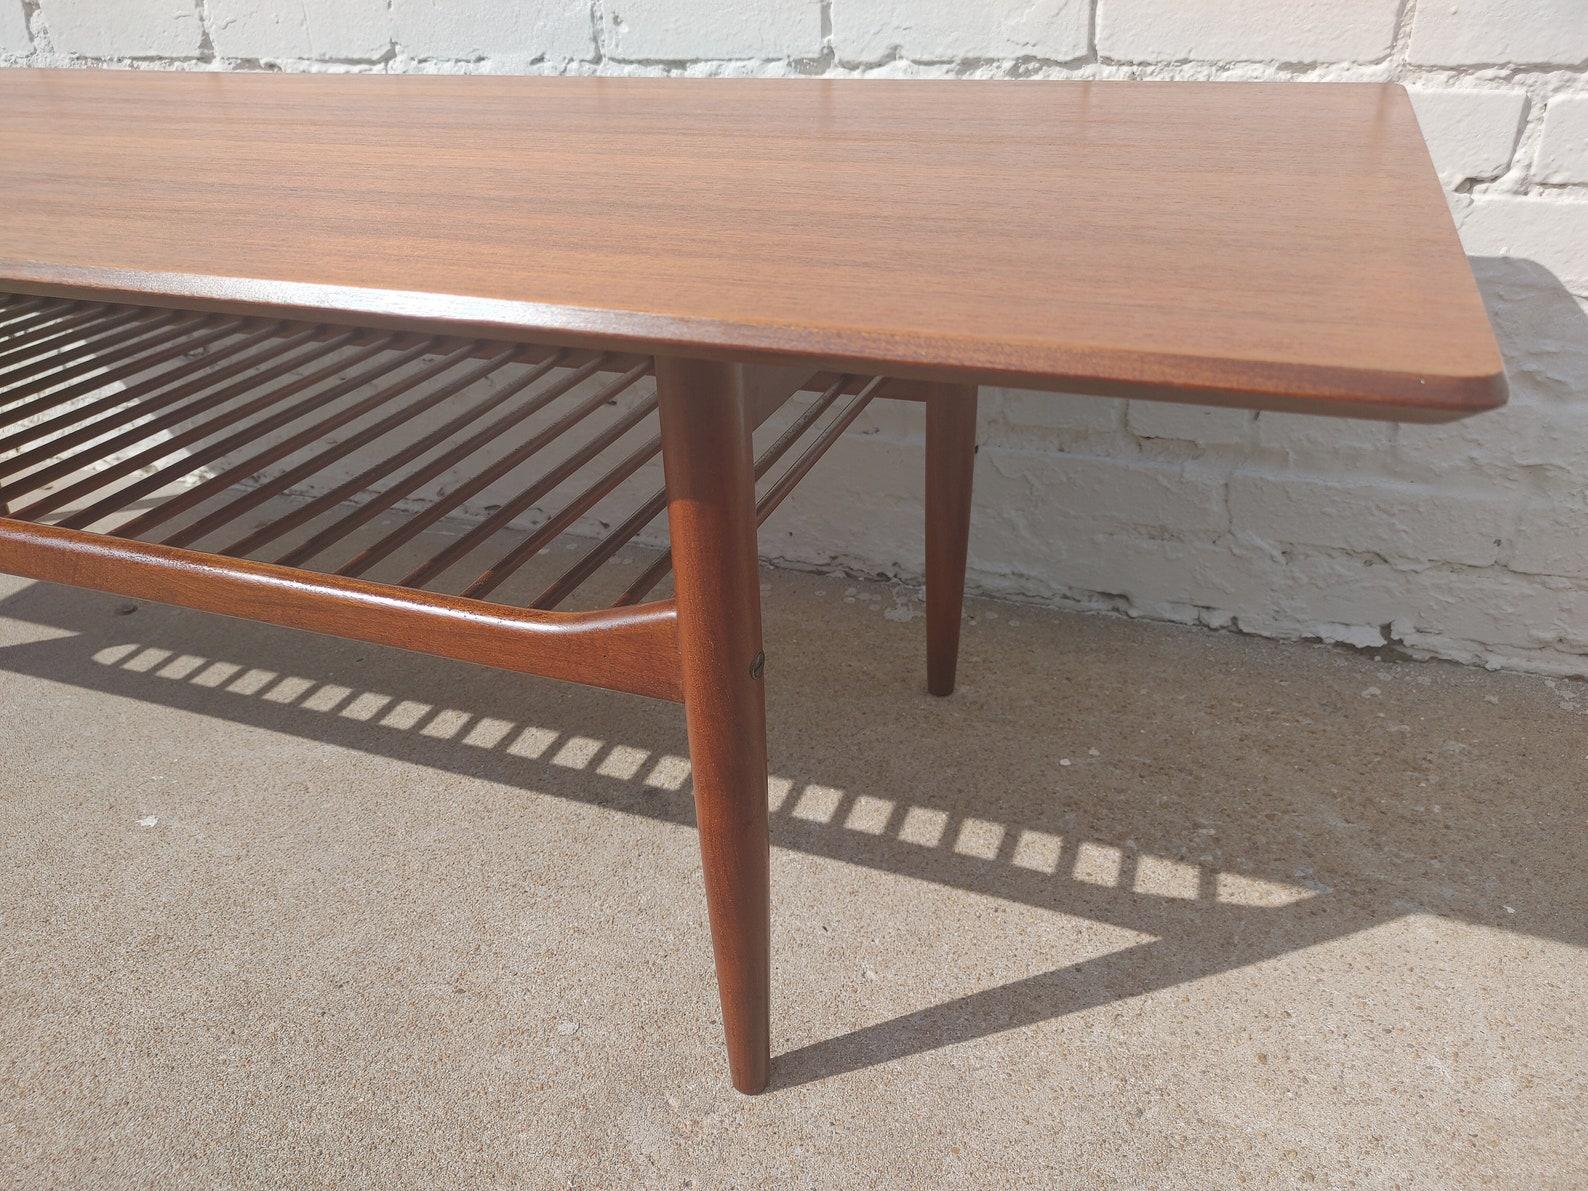 Mid Century English Modern Coffee Table by Kofod Larsen

Above average vintage condition and structurally sound. Has some expected slight finish wear and scratching. Tops have been refinished and do not have original factory finish. There are two of